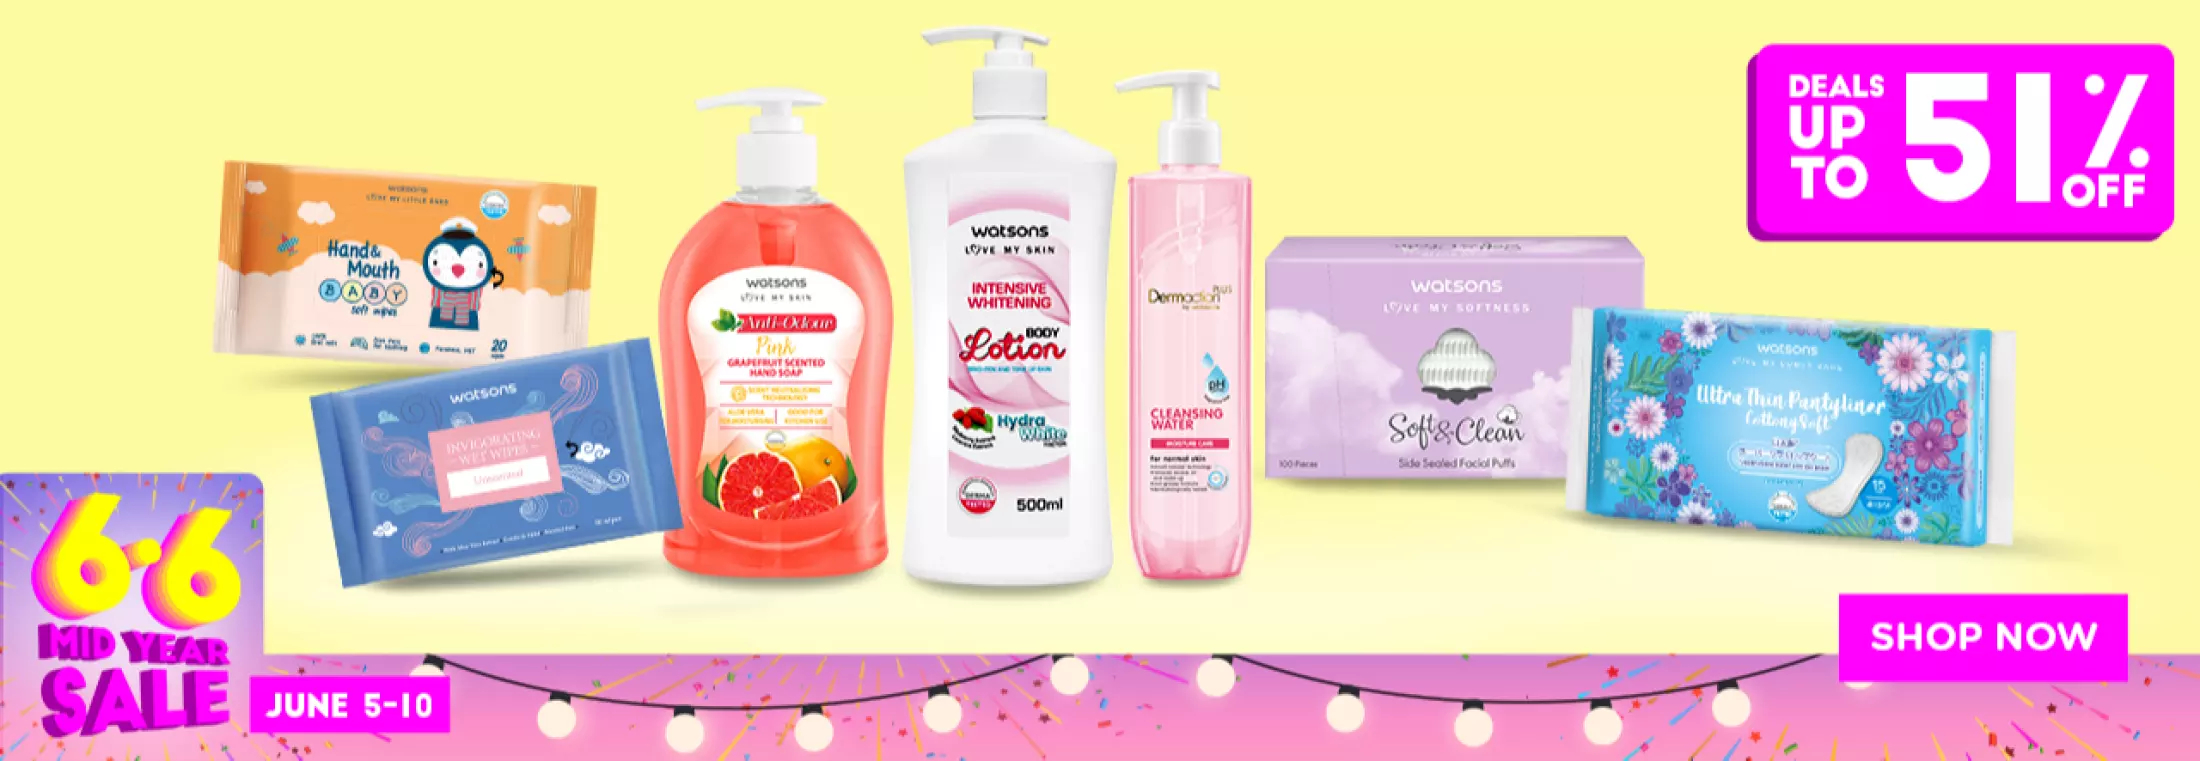 These Watsons Beauty Brands Are Dishing Out Discounts of Up to 51% on Lazada 6.6 Mid Year Sale